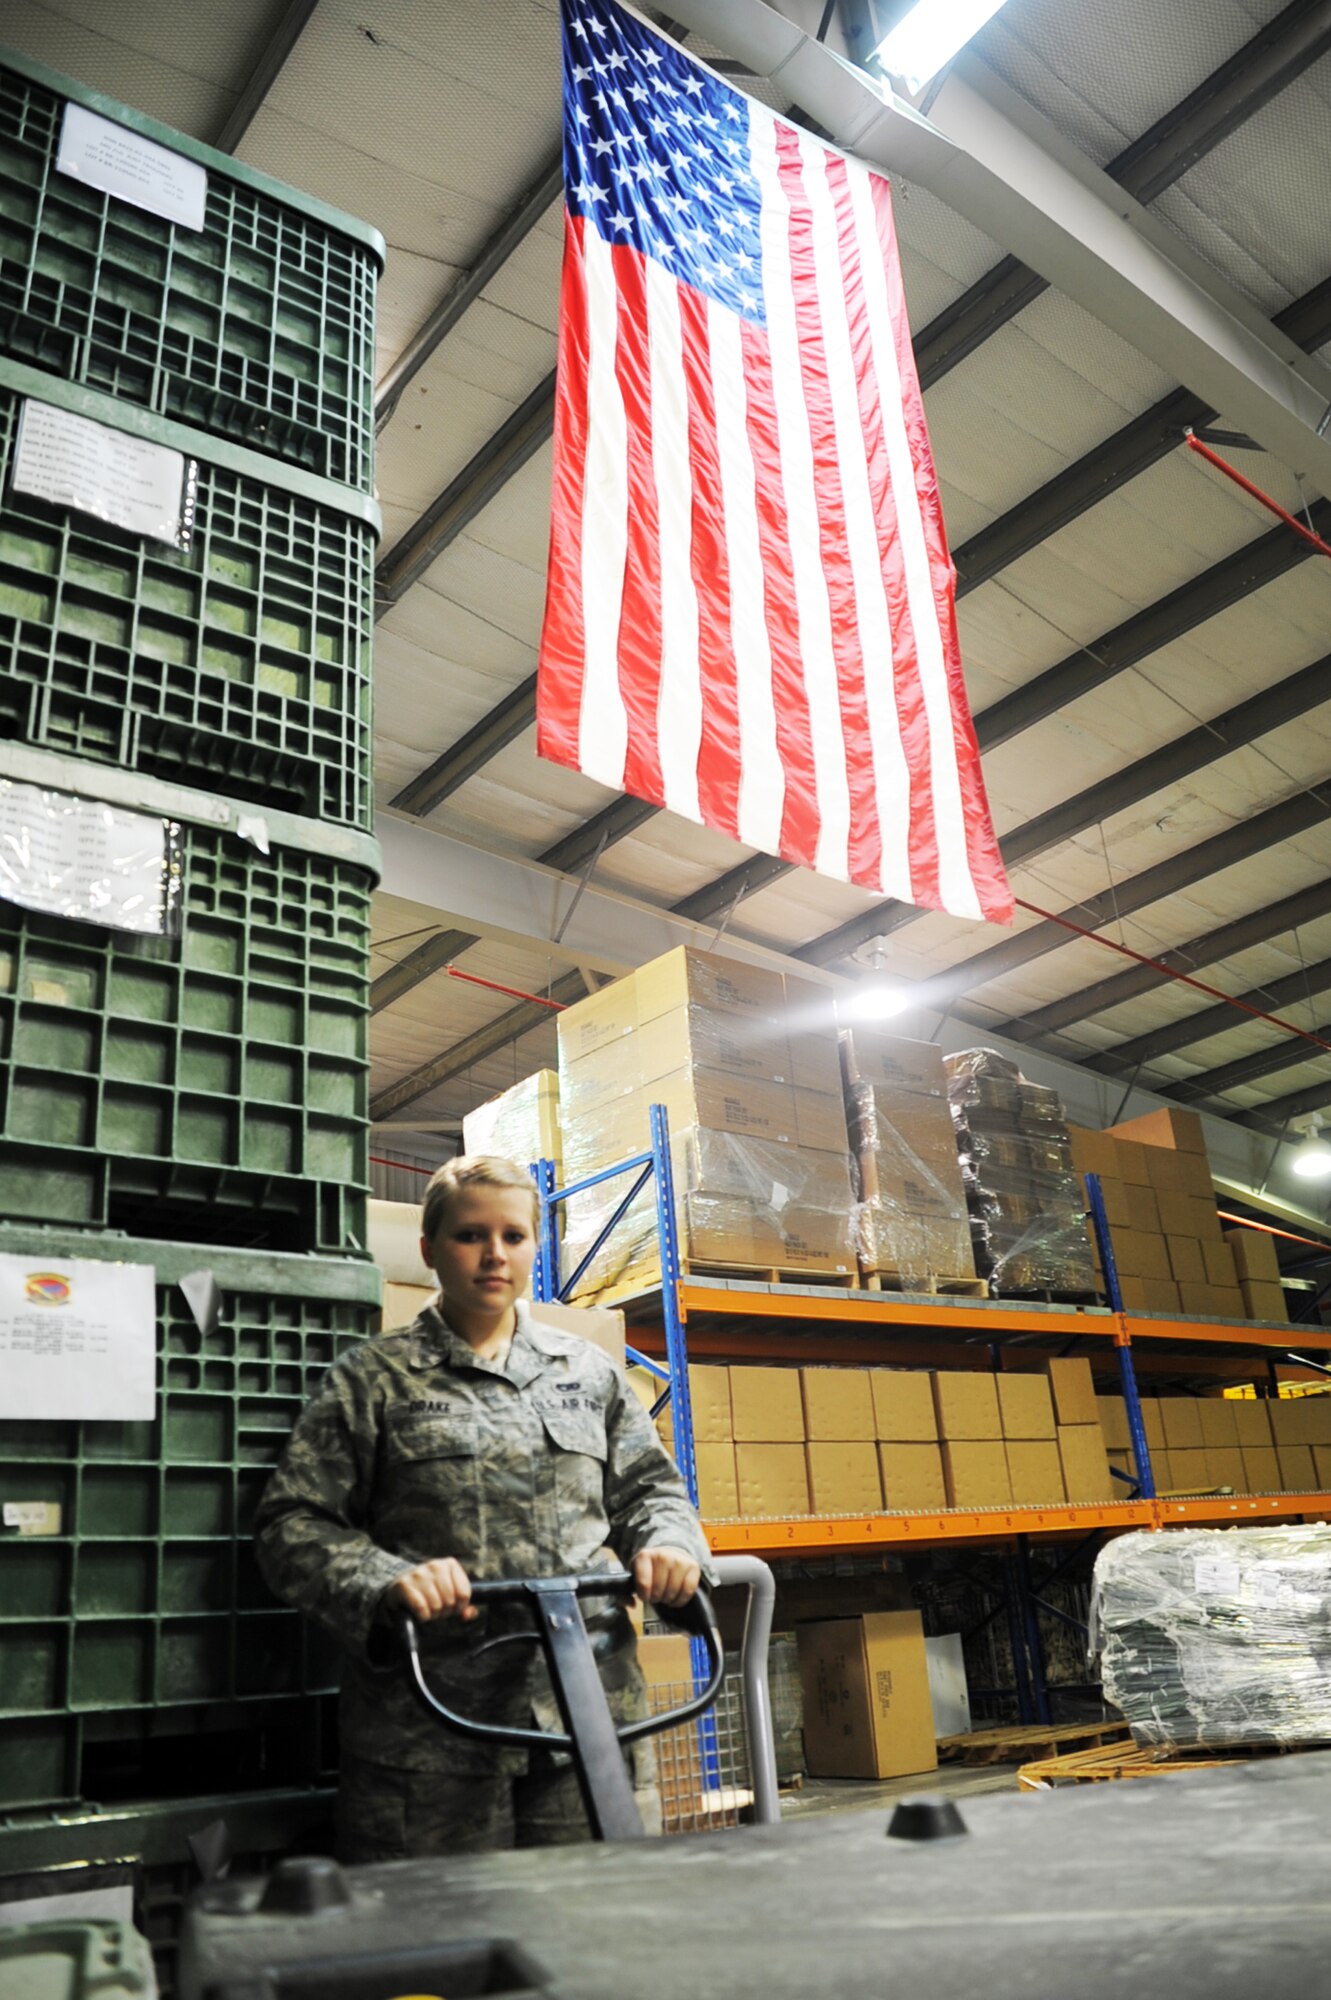 Airman 1st Class Te'Anna R. Drake, a traffic management journeyman with the 380th Expeditionary Logistics Readiness Squadron, moves some cargo into place at her unit's warehouse at an non-disclosed location in Southwest Asia on Jan. 15, 2009.  In her deployed work, Airman Drake packs and ships out official priority shipments to all other bases in the U.S. as well as the deployed area of responsibility. She is deployed from the 60th Aerial Port Squadron at Travis Air Force Base, Calif., and her hometown is Roy, Wash.  (U.S. Air Force Photo/Tech. Sgt. Scott T. Sturkol/Released)